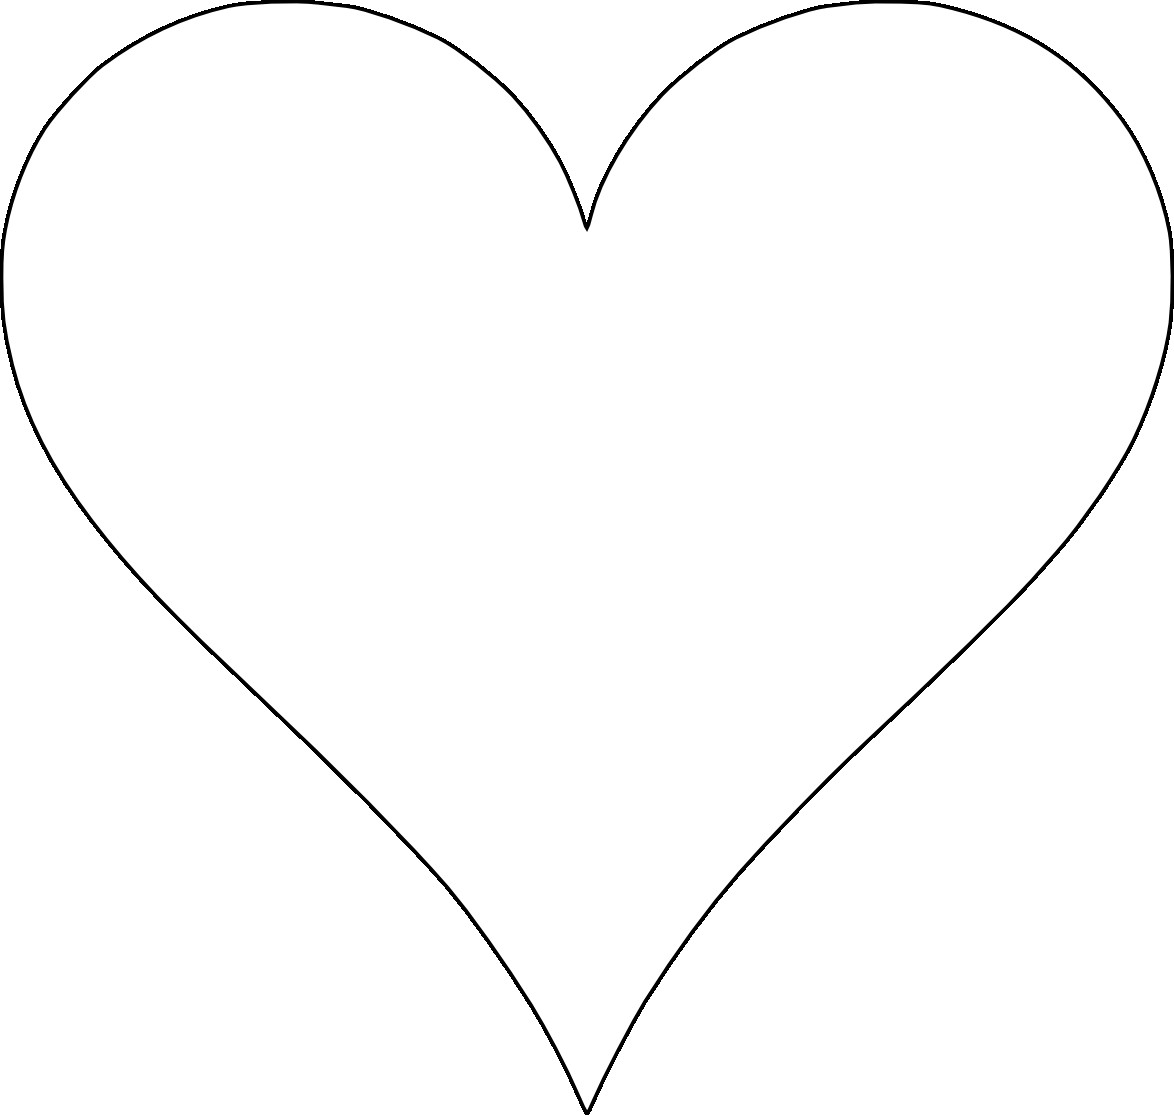 free clipart heart template - photo #35